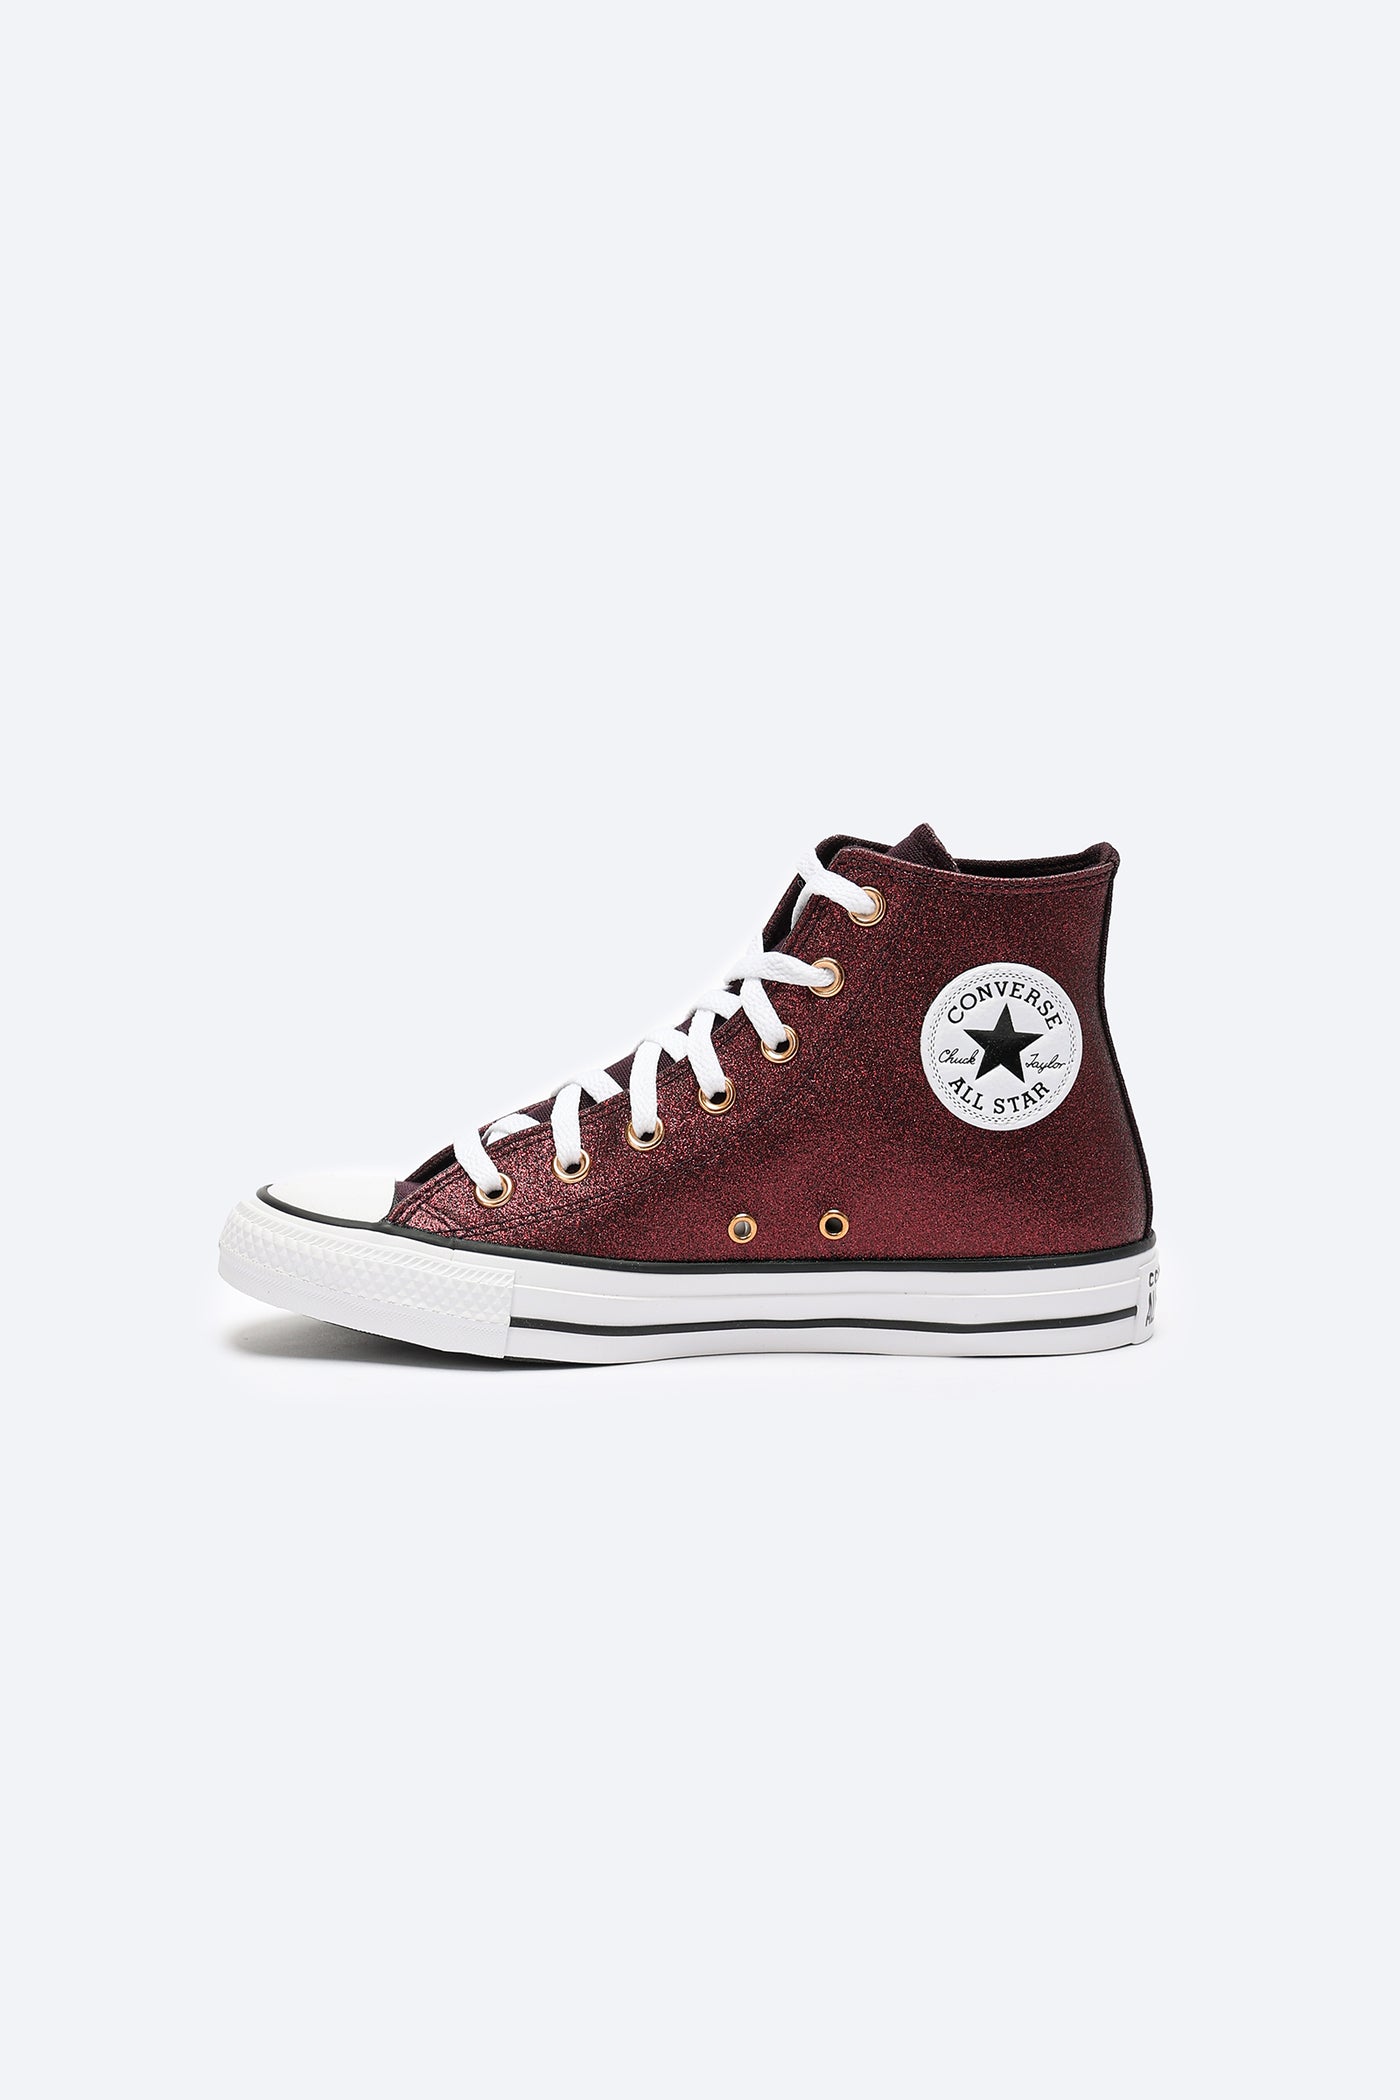 Sneakers -  Chuck Taylor All Star Forest Glam - Cruise High